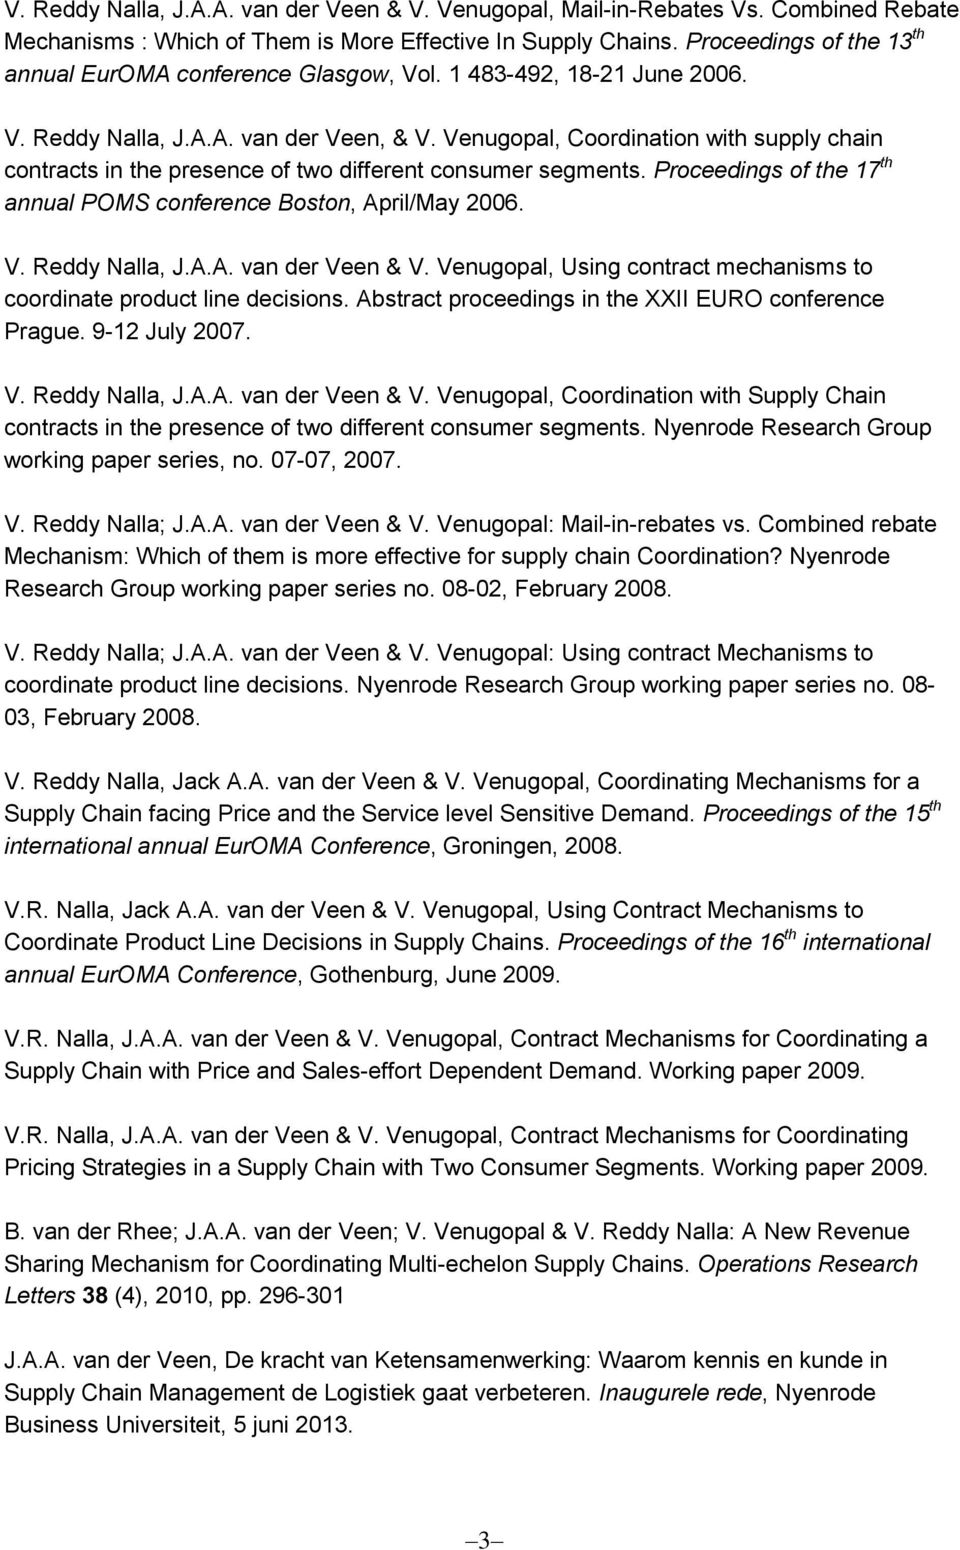 Venugopal, Coordination with supply chain contracts in the presence of two different consumer segments. Proceedings of the 17 th annual POMS conference Boston, April/May 2006. V. Reddy Nalla, J.A.A. van der Veen & V.